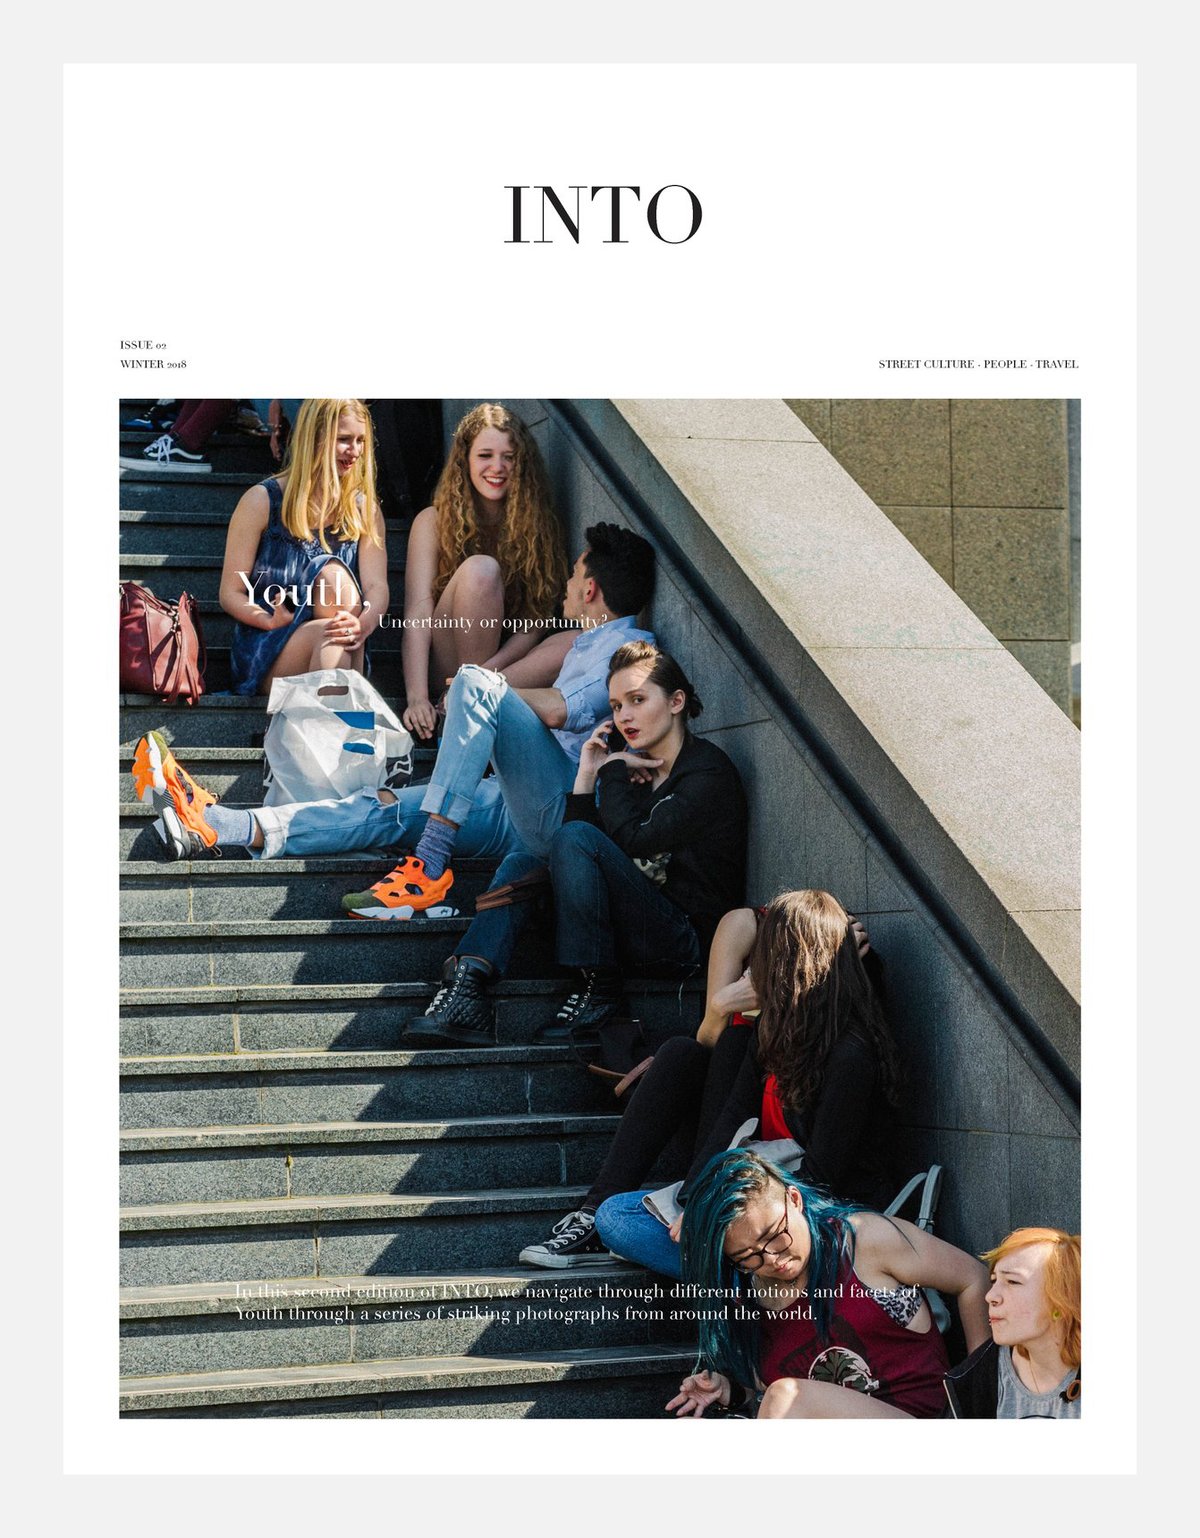 Image of INTO magazine, edition n2 - YOUTH, uncertainty or opportunity?